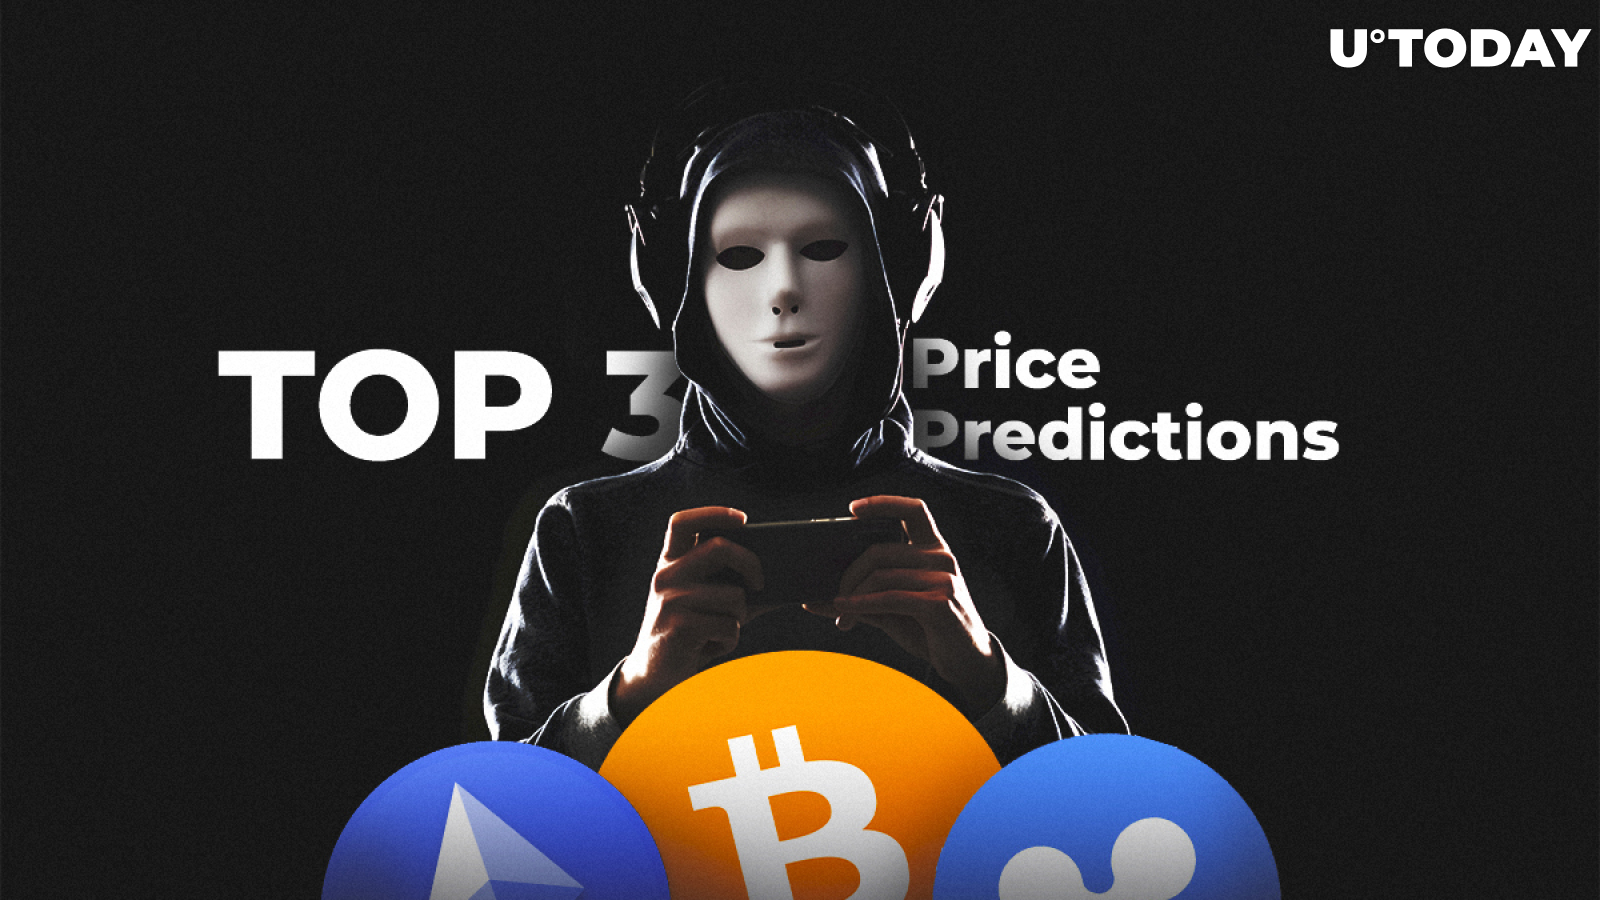 TOP 3 Price Predictions: BTC, ETH, XRP — Binance Hack as the Reason Behind the Market Dump